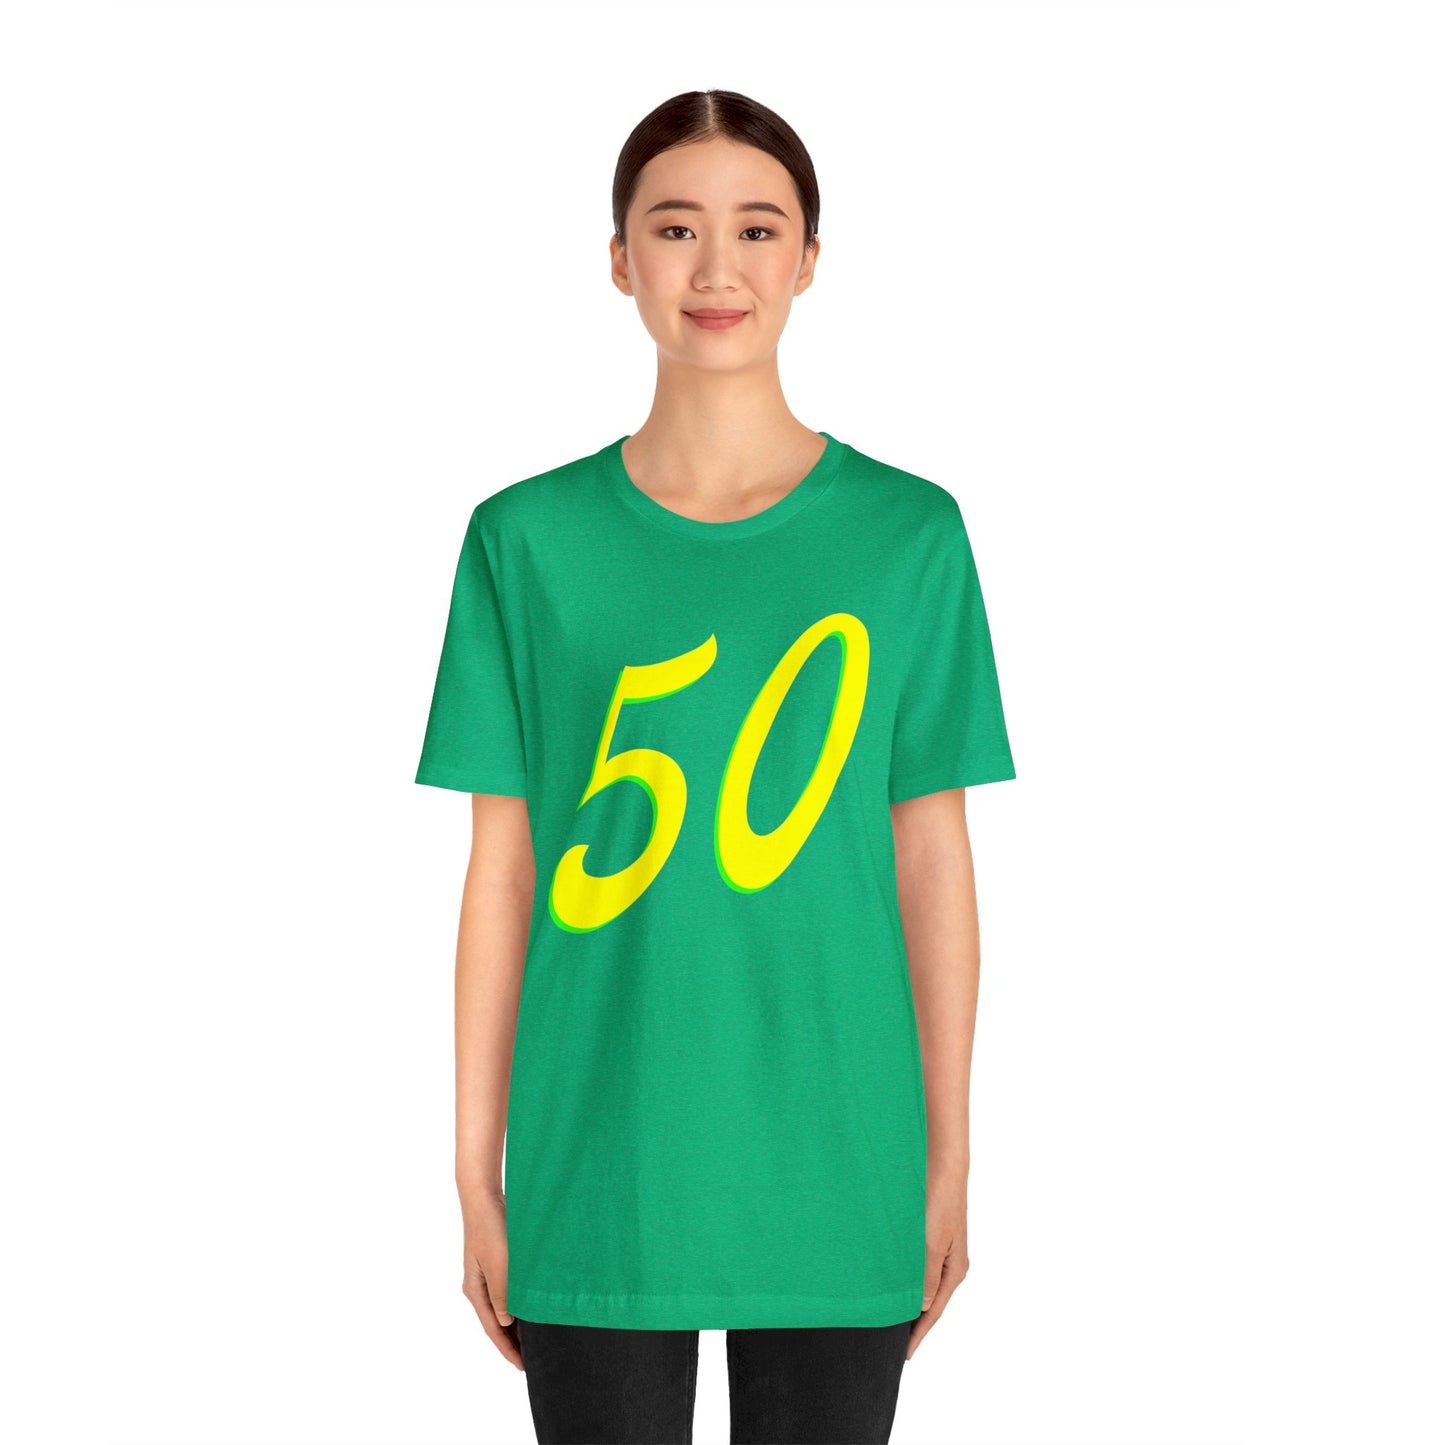 Number 50 Design - Soft Cotton Tee for birthdays and celebrations, Gift for friends and family, Multiple Options by clothezy.com in Dark Grey Heather Size Medium - Buy Now